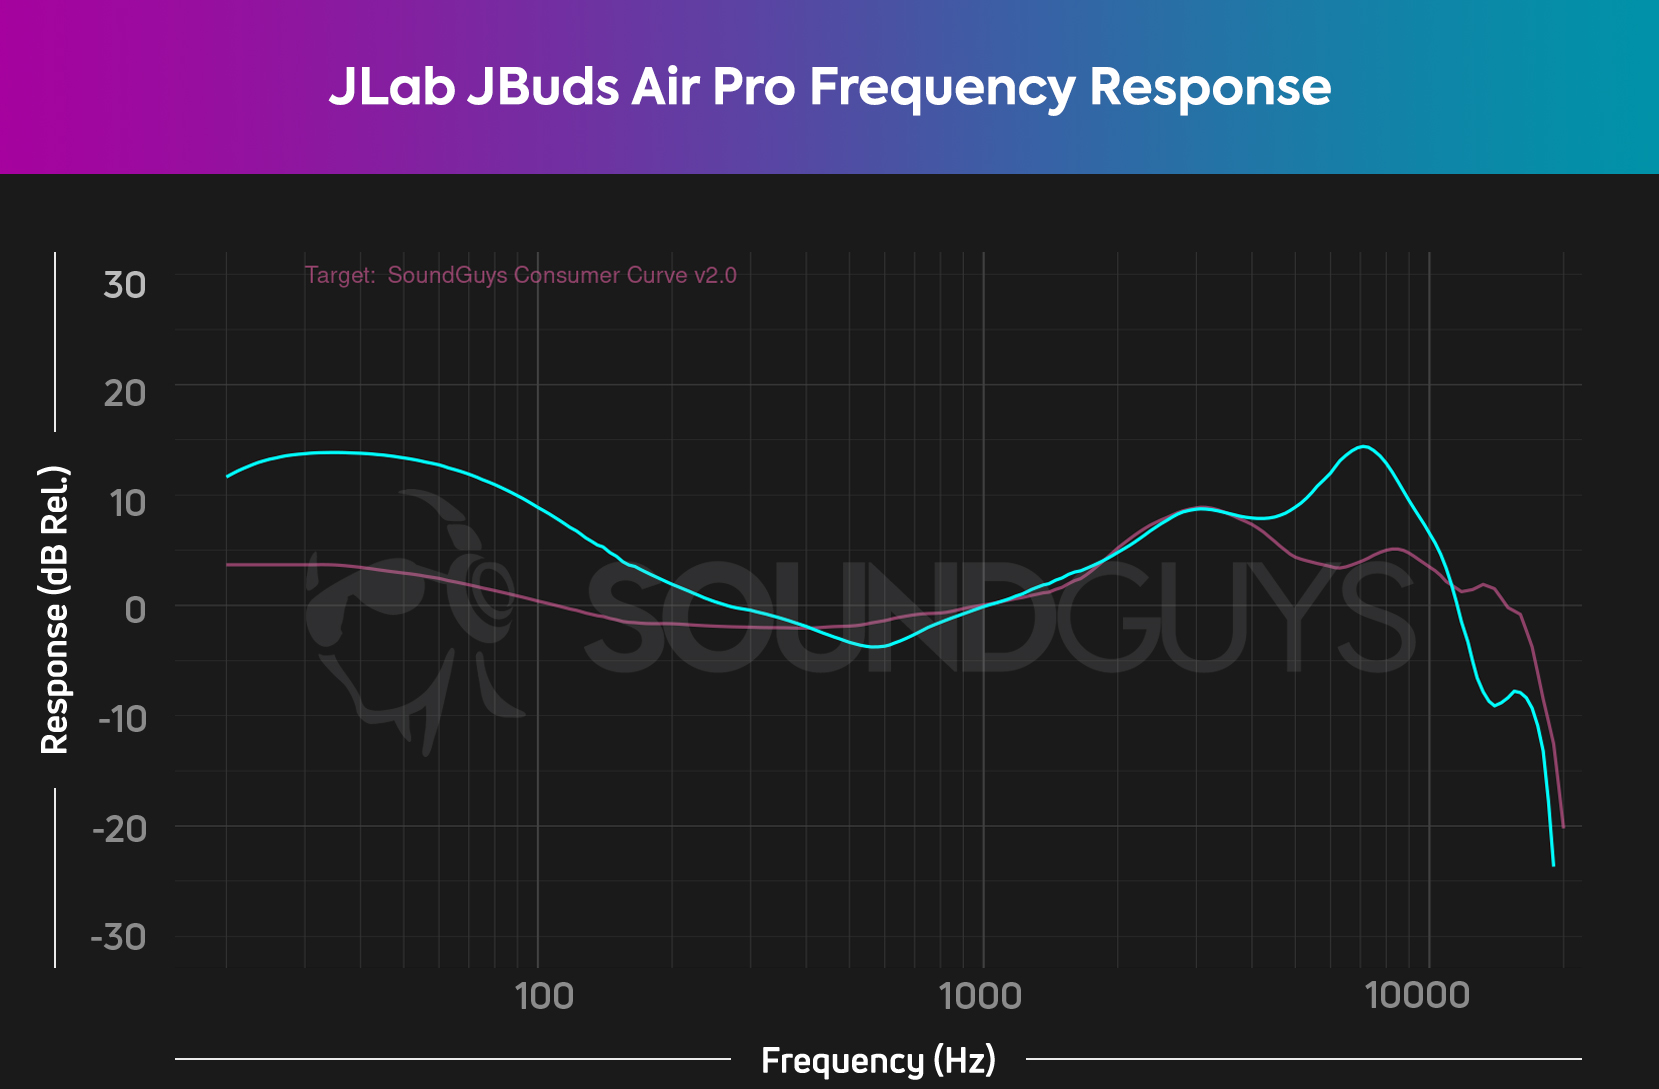 The frequency response chart for the JLab JBuds Air Pro.